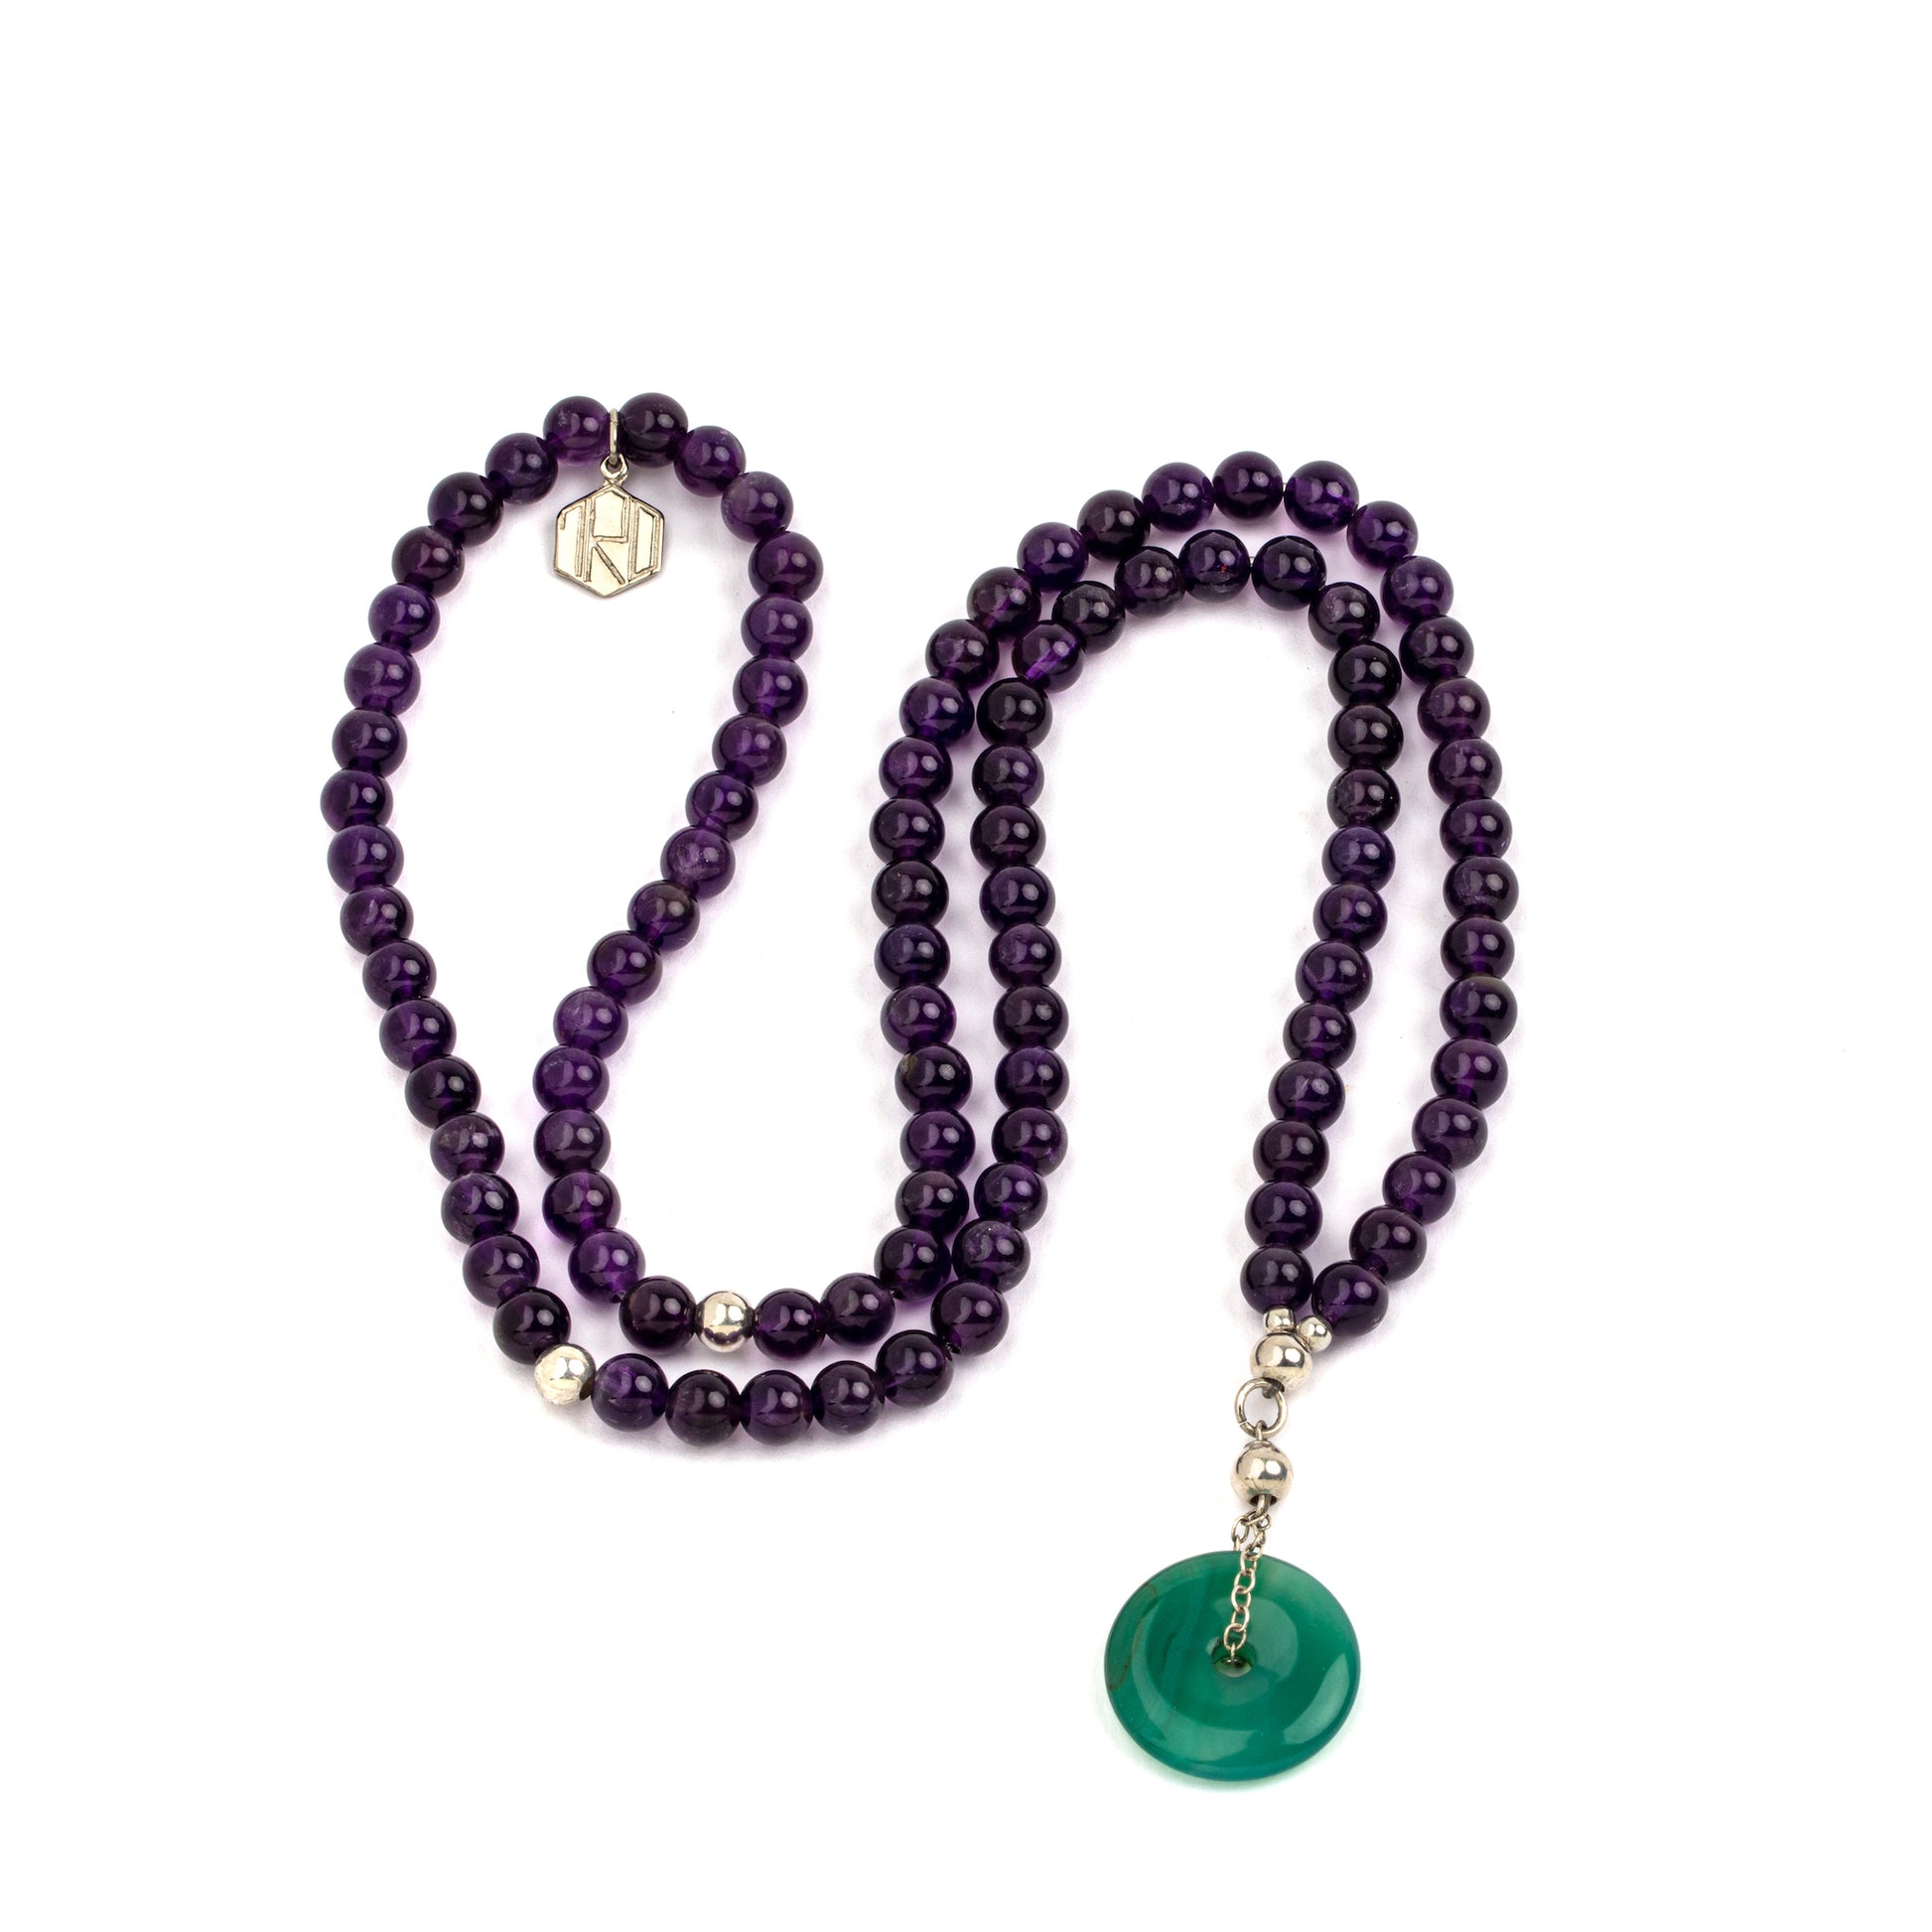 amethyst beads and green agate orb necklace pendant